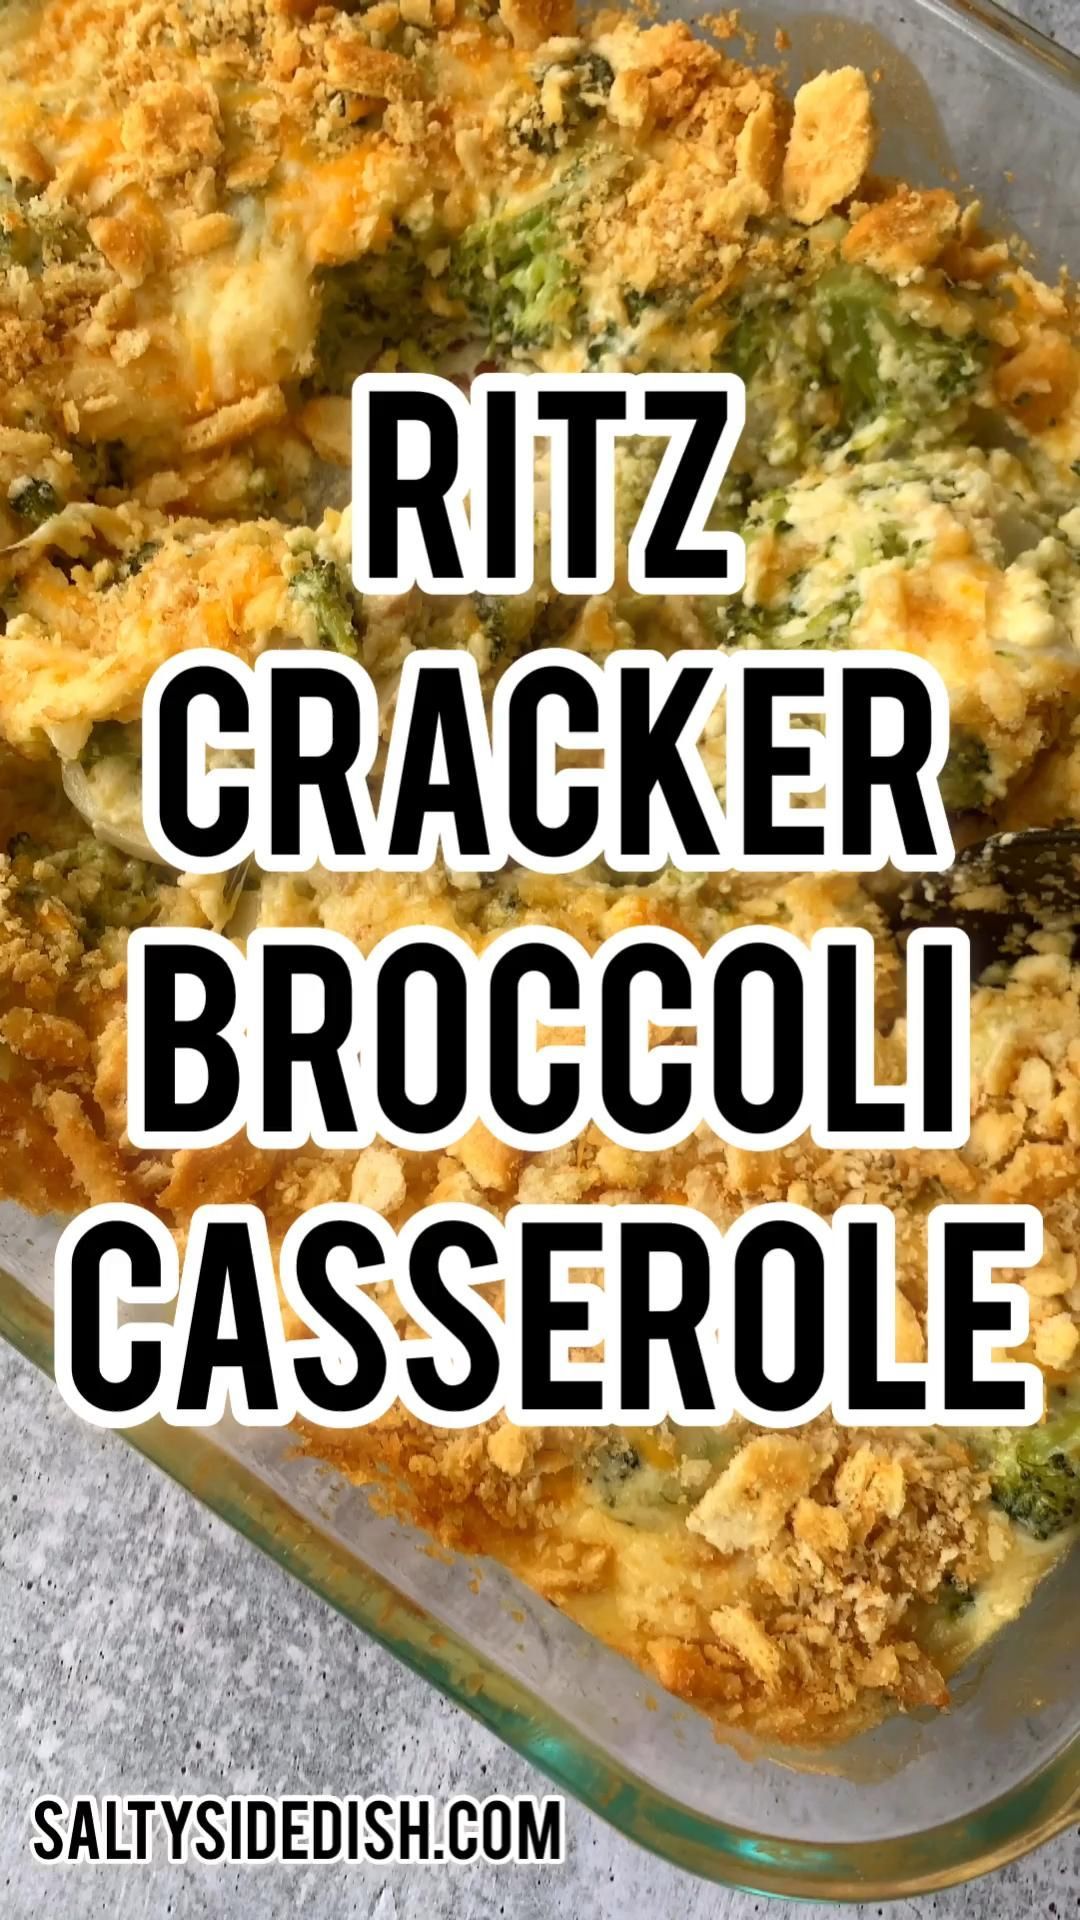 Broccoli Cheese Casserole with Ritz Cracker Topping -   18 thanksgiving recipes ideas